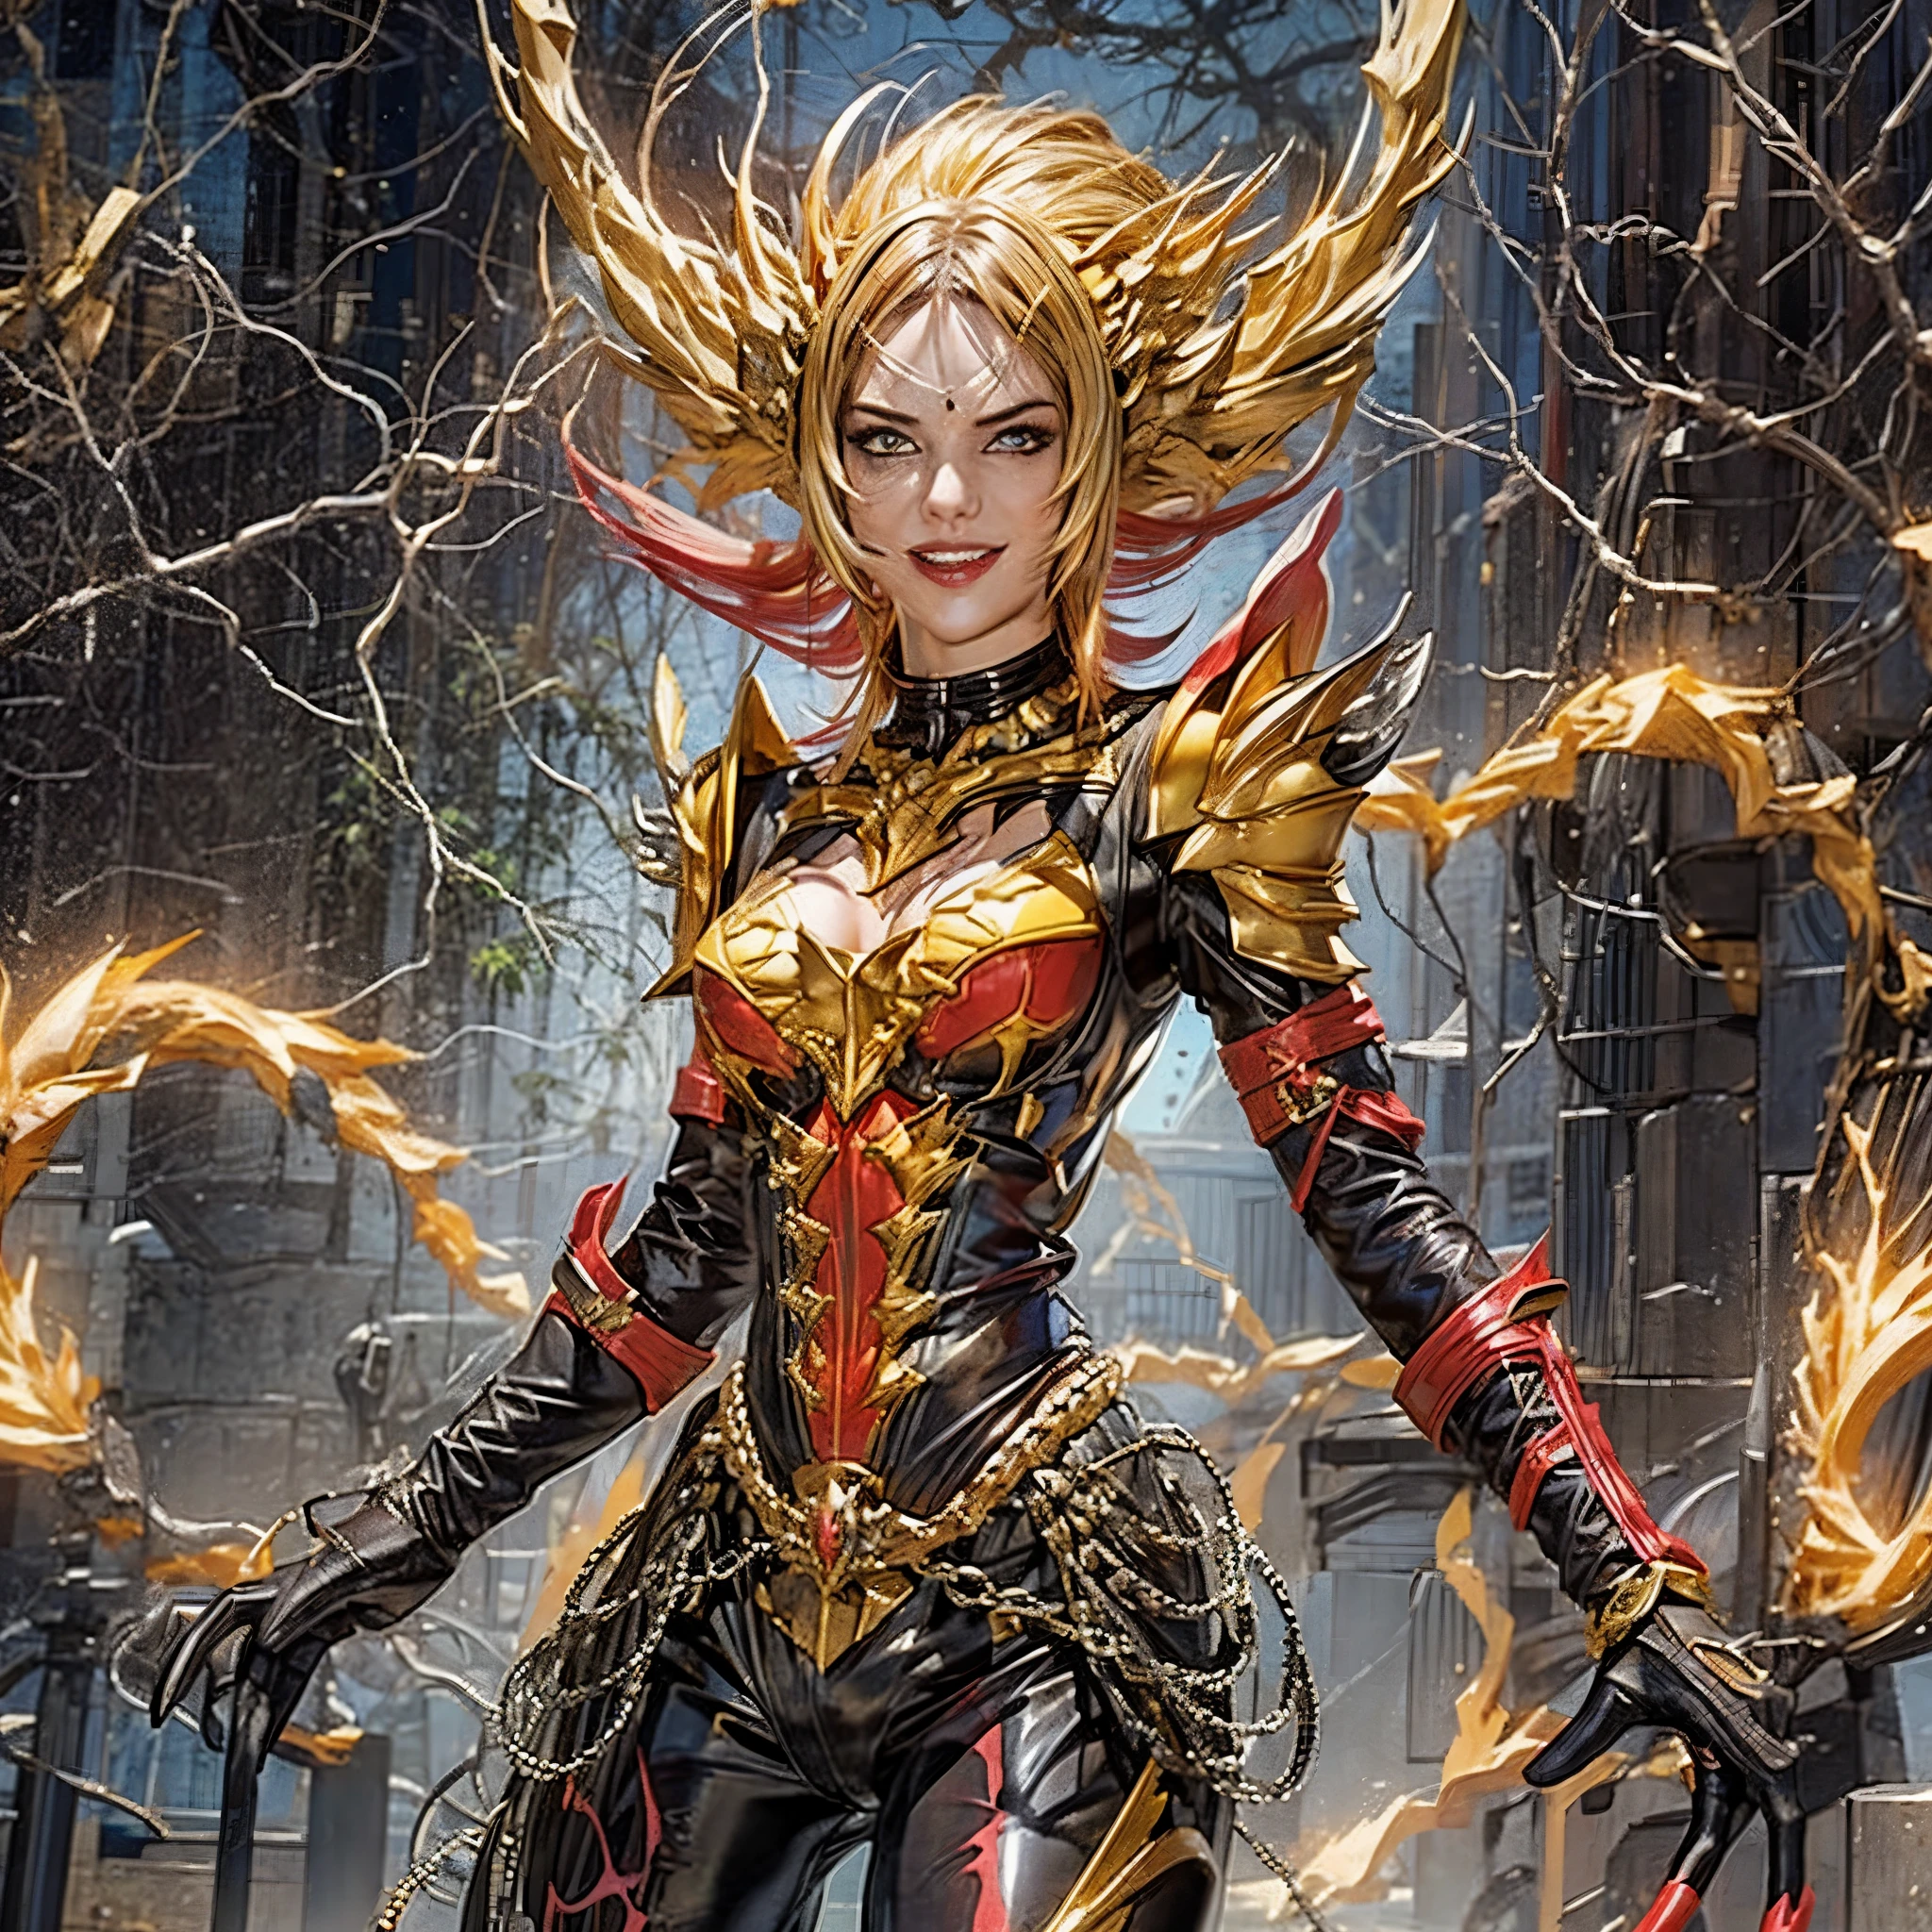 Armored alien princess with short, vibrant yellow hair and electrifying lightning powers resides in an uncharted galaxy. Her asymmetrical, stylized golden armor, adorned with electric design elements, shines brightly, reflecting her villainous personality. Her seductive smile and a provocative laugh accentuate her allure, contrasting the intimidating aura of her armor. Attacking the viewer while laughing. add_detail:2
